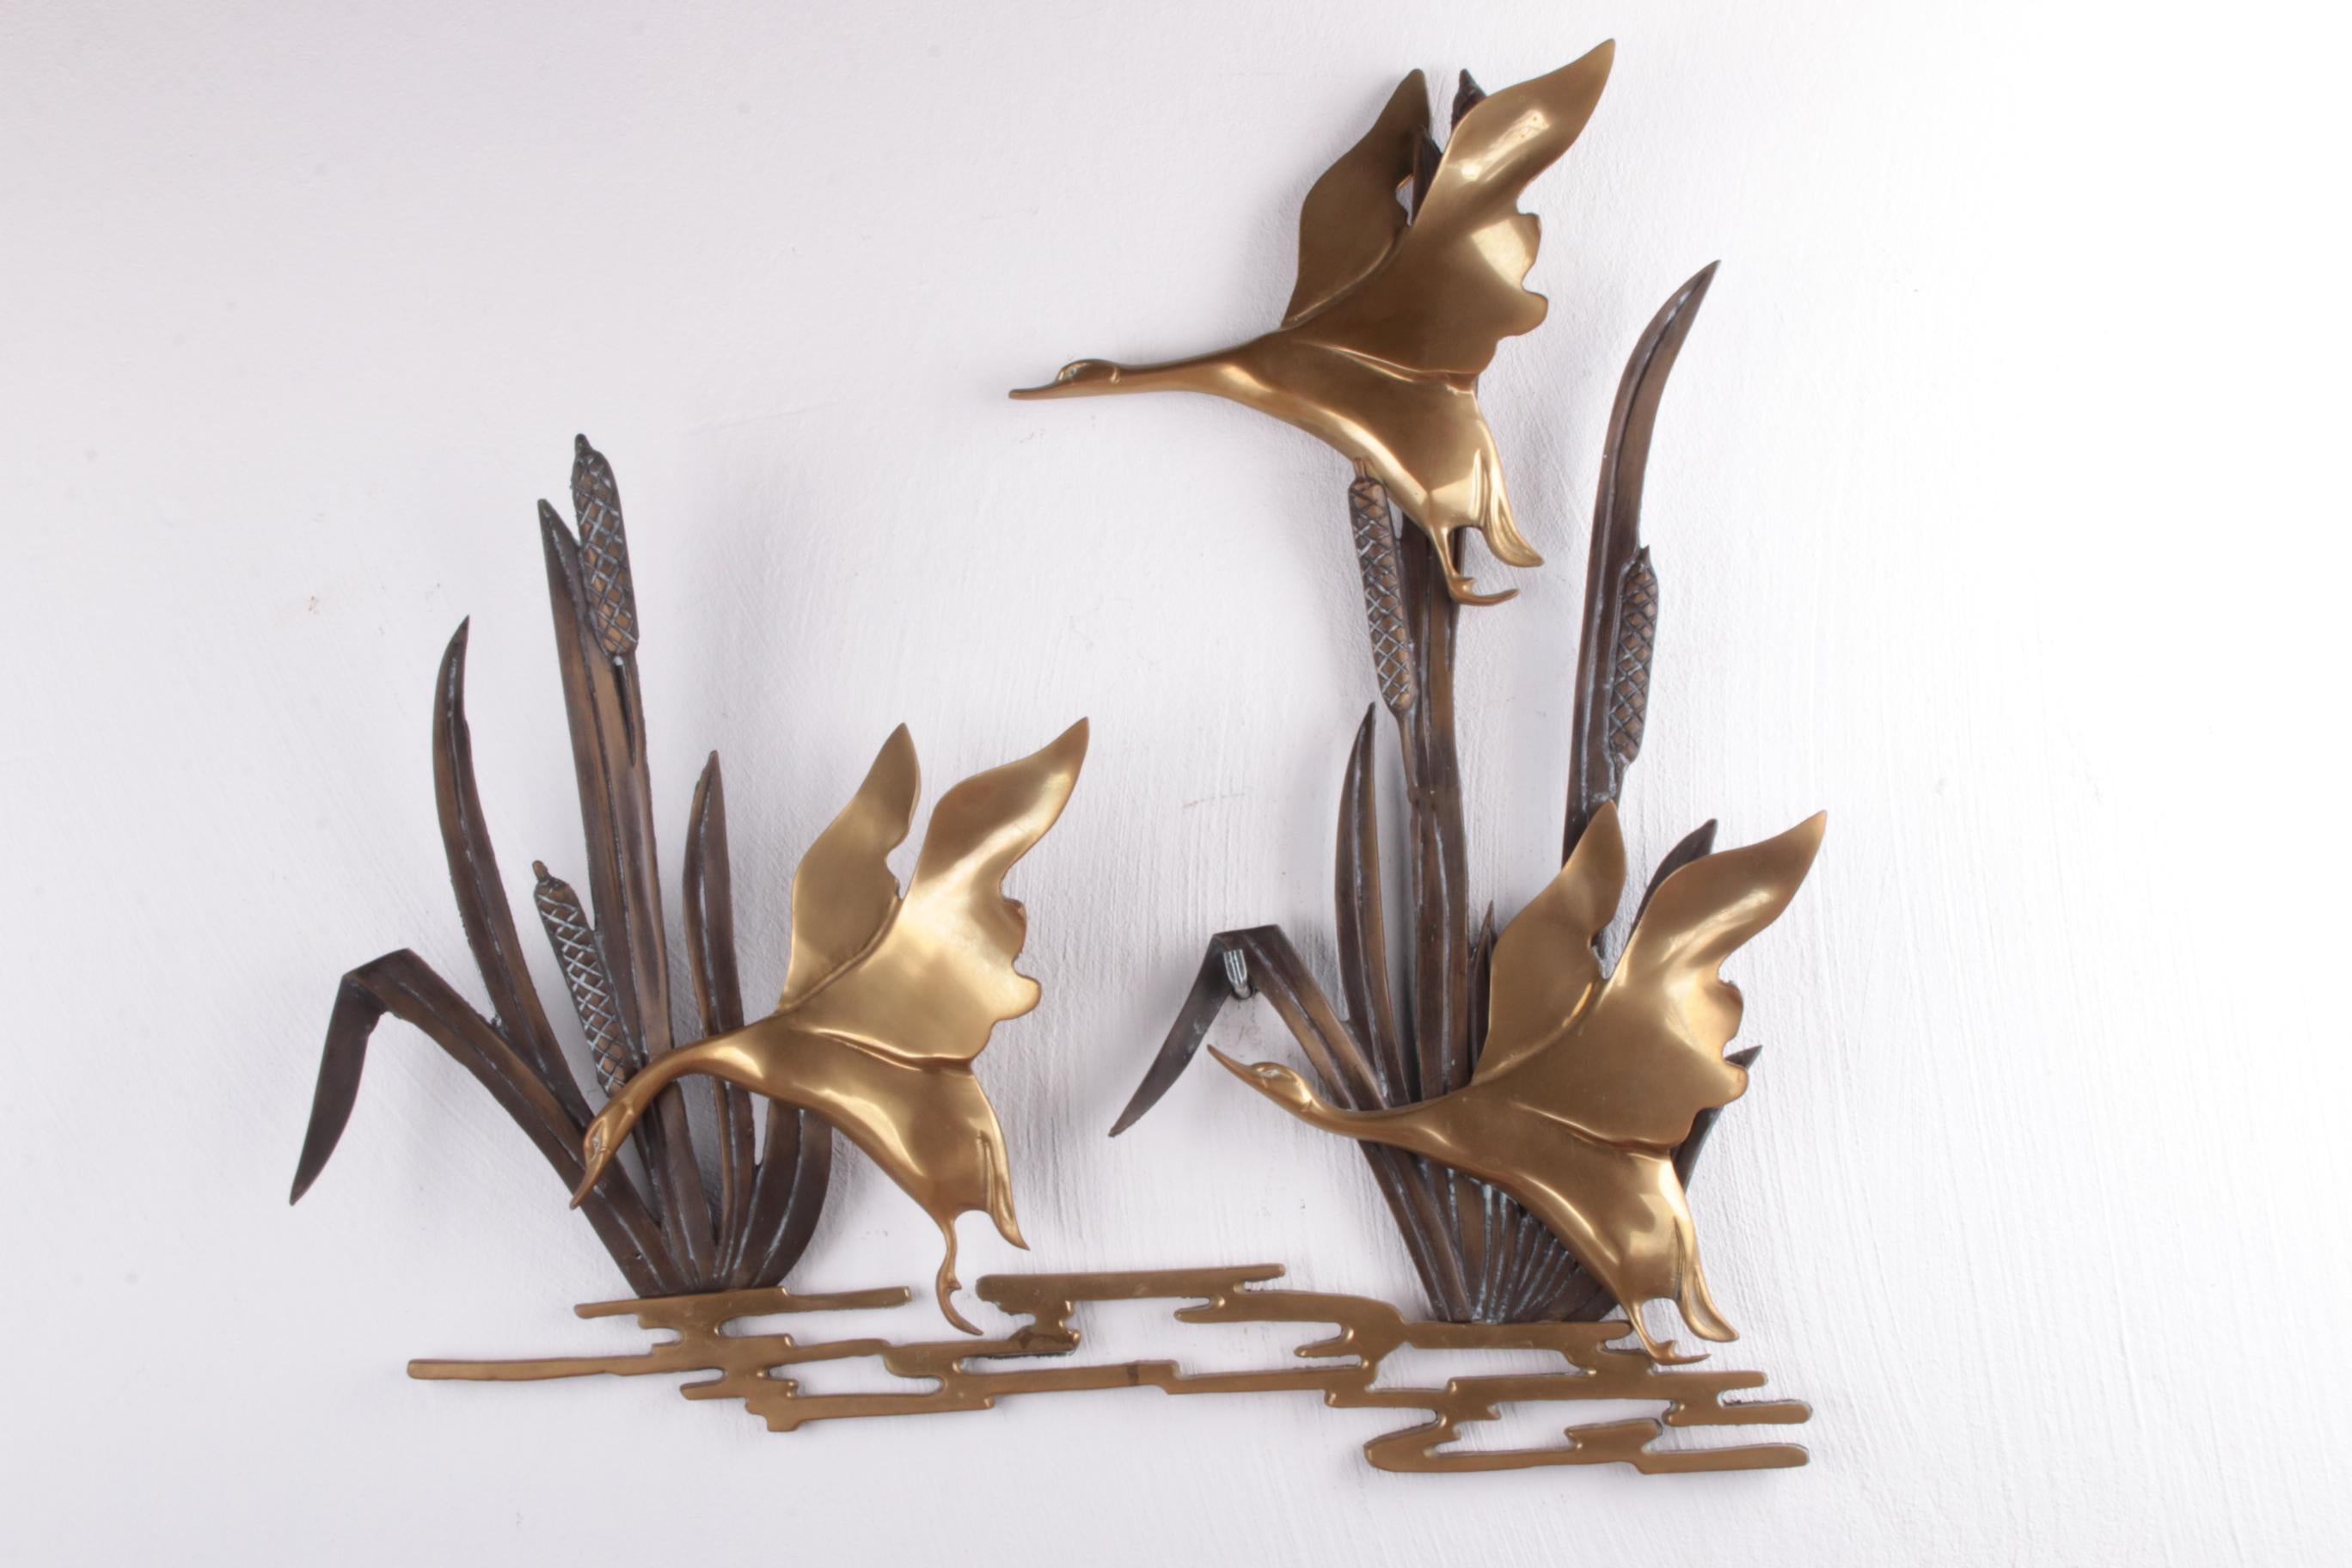 Flying ducks from the reeds made of copper


This is a very nice vintage copper wall decoration made of metal with copper ducks. These ducks fly up from the reeds. This looks great in a hall or in the right place on the wall. This was made in the